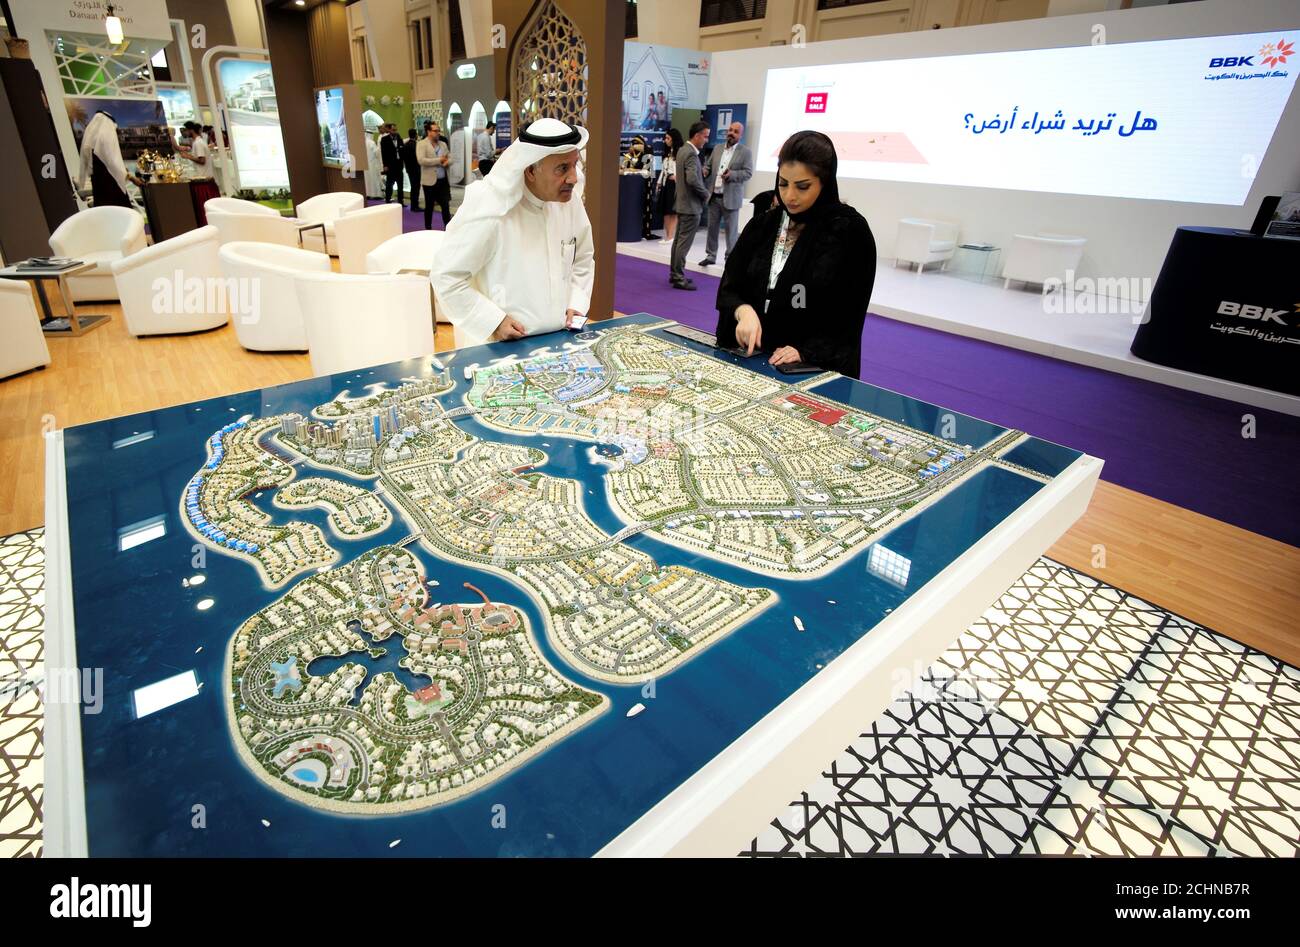 Visitors look at the mockup of a project at the Gulf Property, Construction and Interior Exhibition in Manama, Bahrain April 26, 2017. REUTERS/Hamad I Mohammed Stock Photo